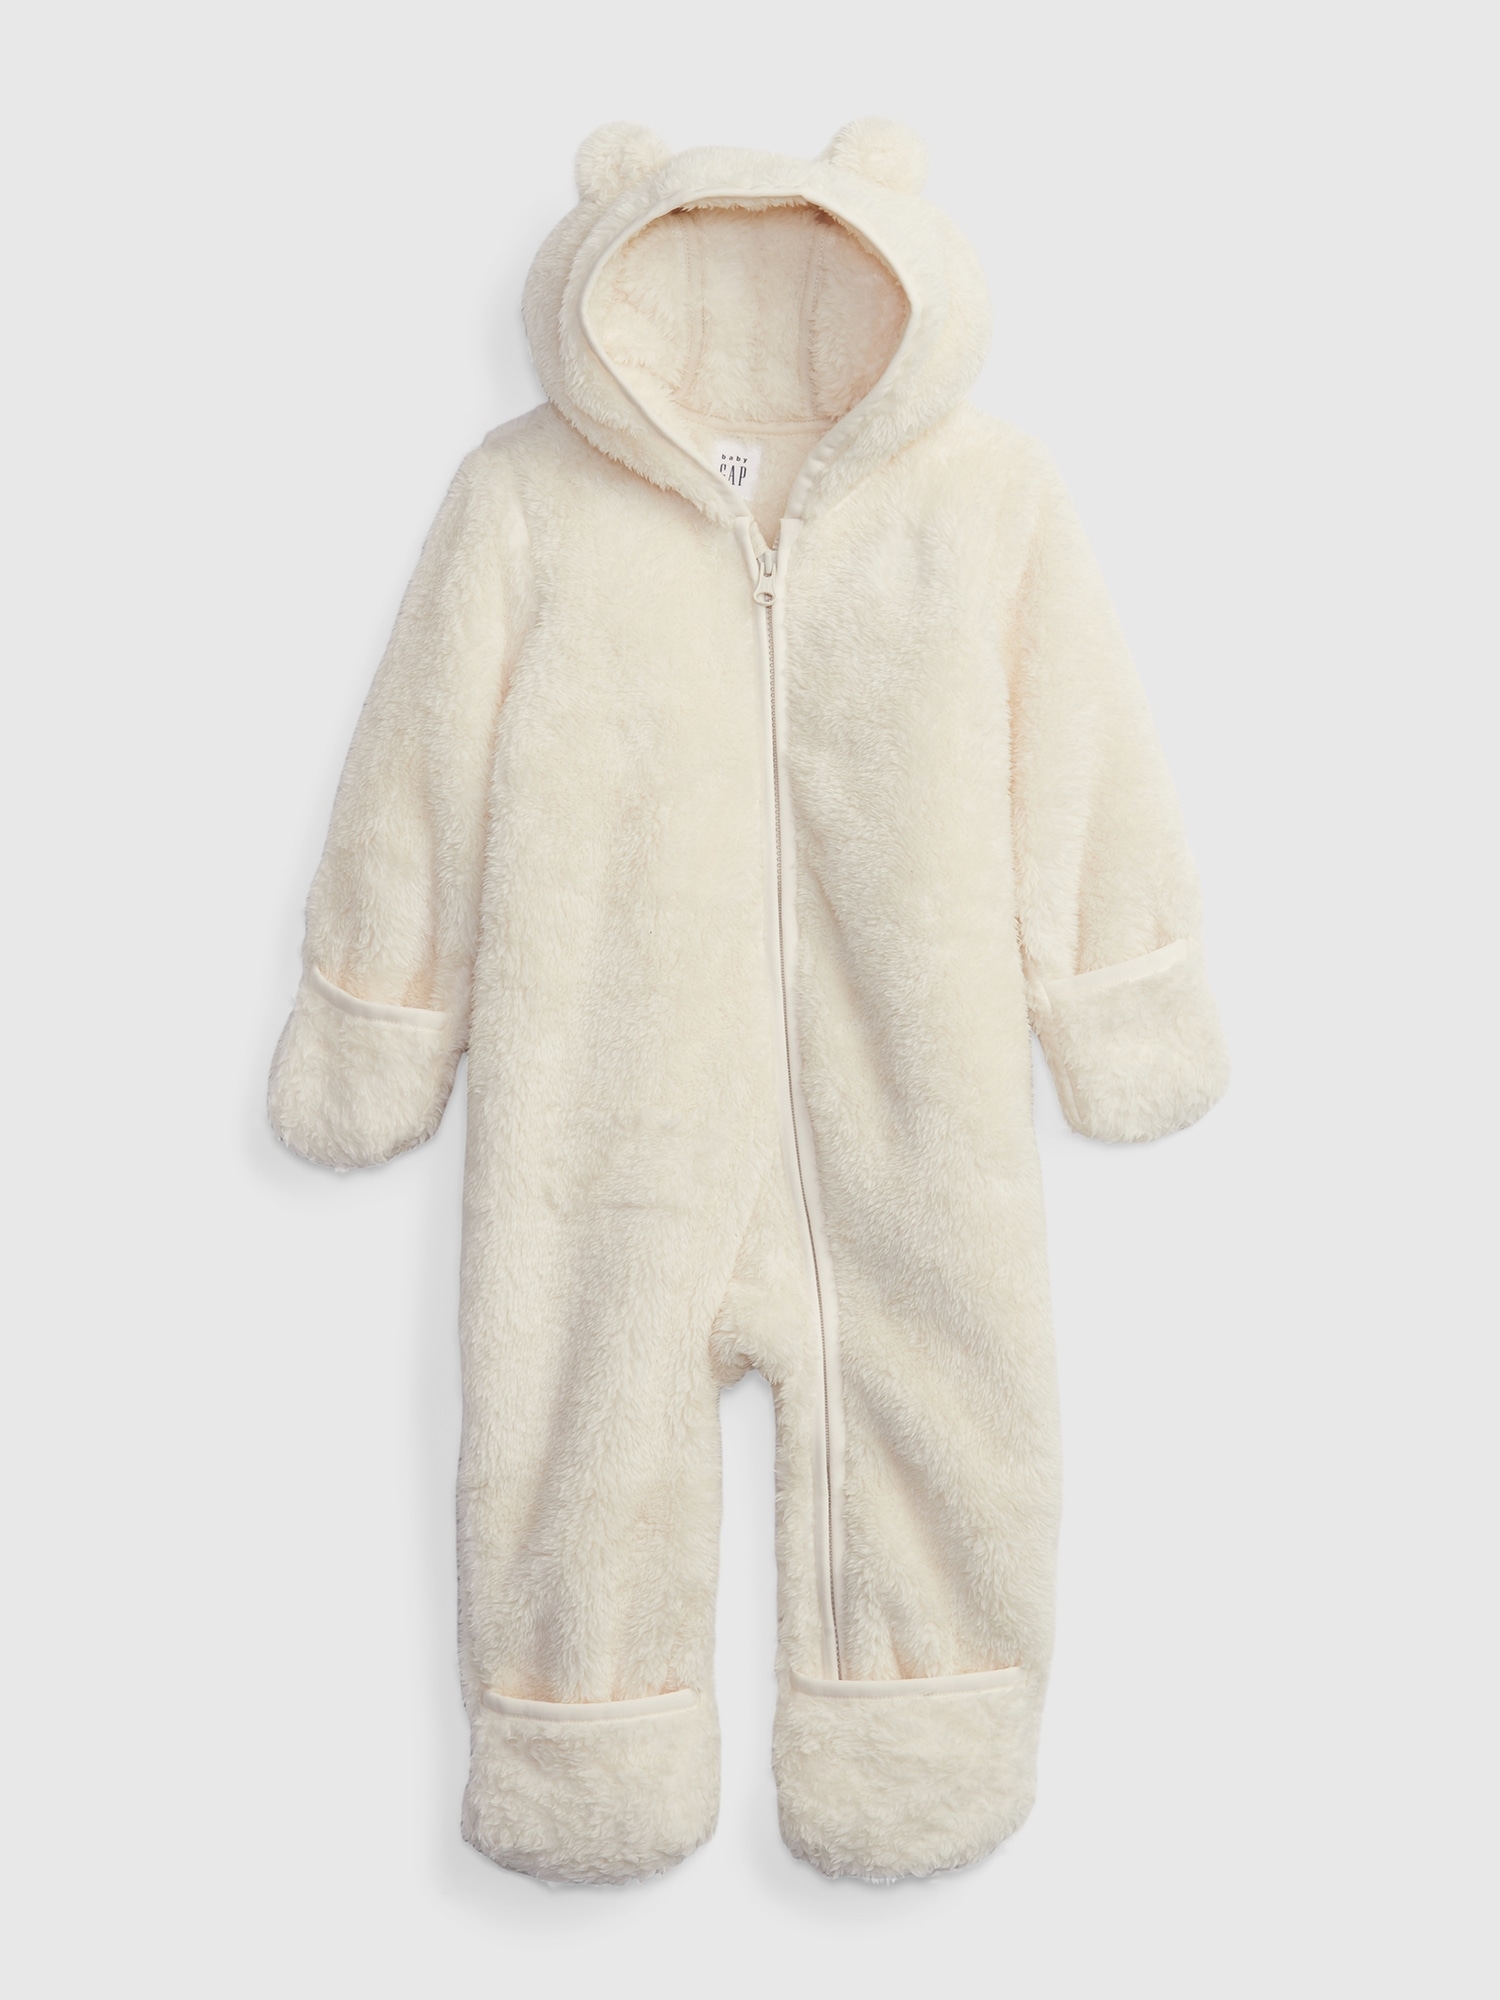 Baby Footless Sherpa One-Piece | Gap